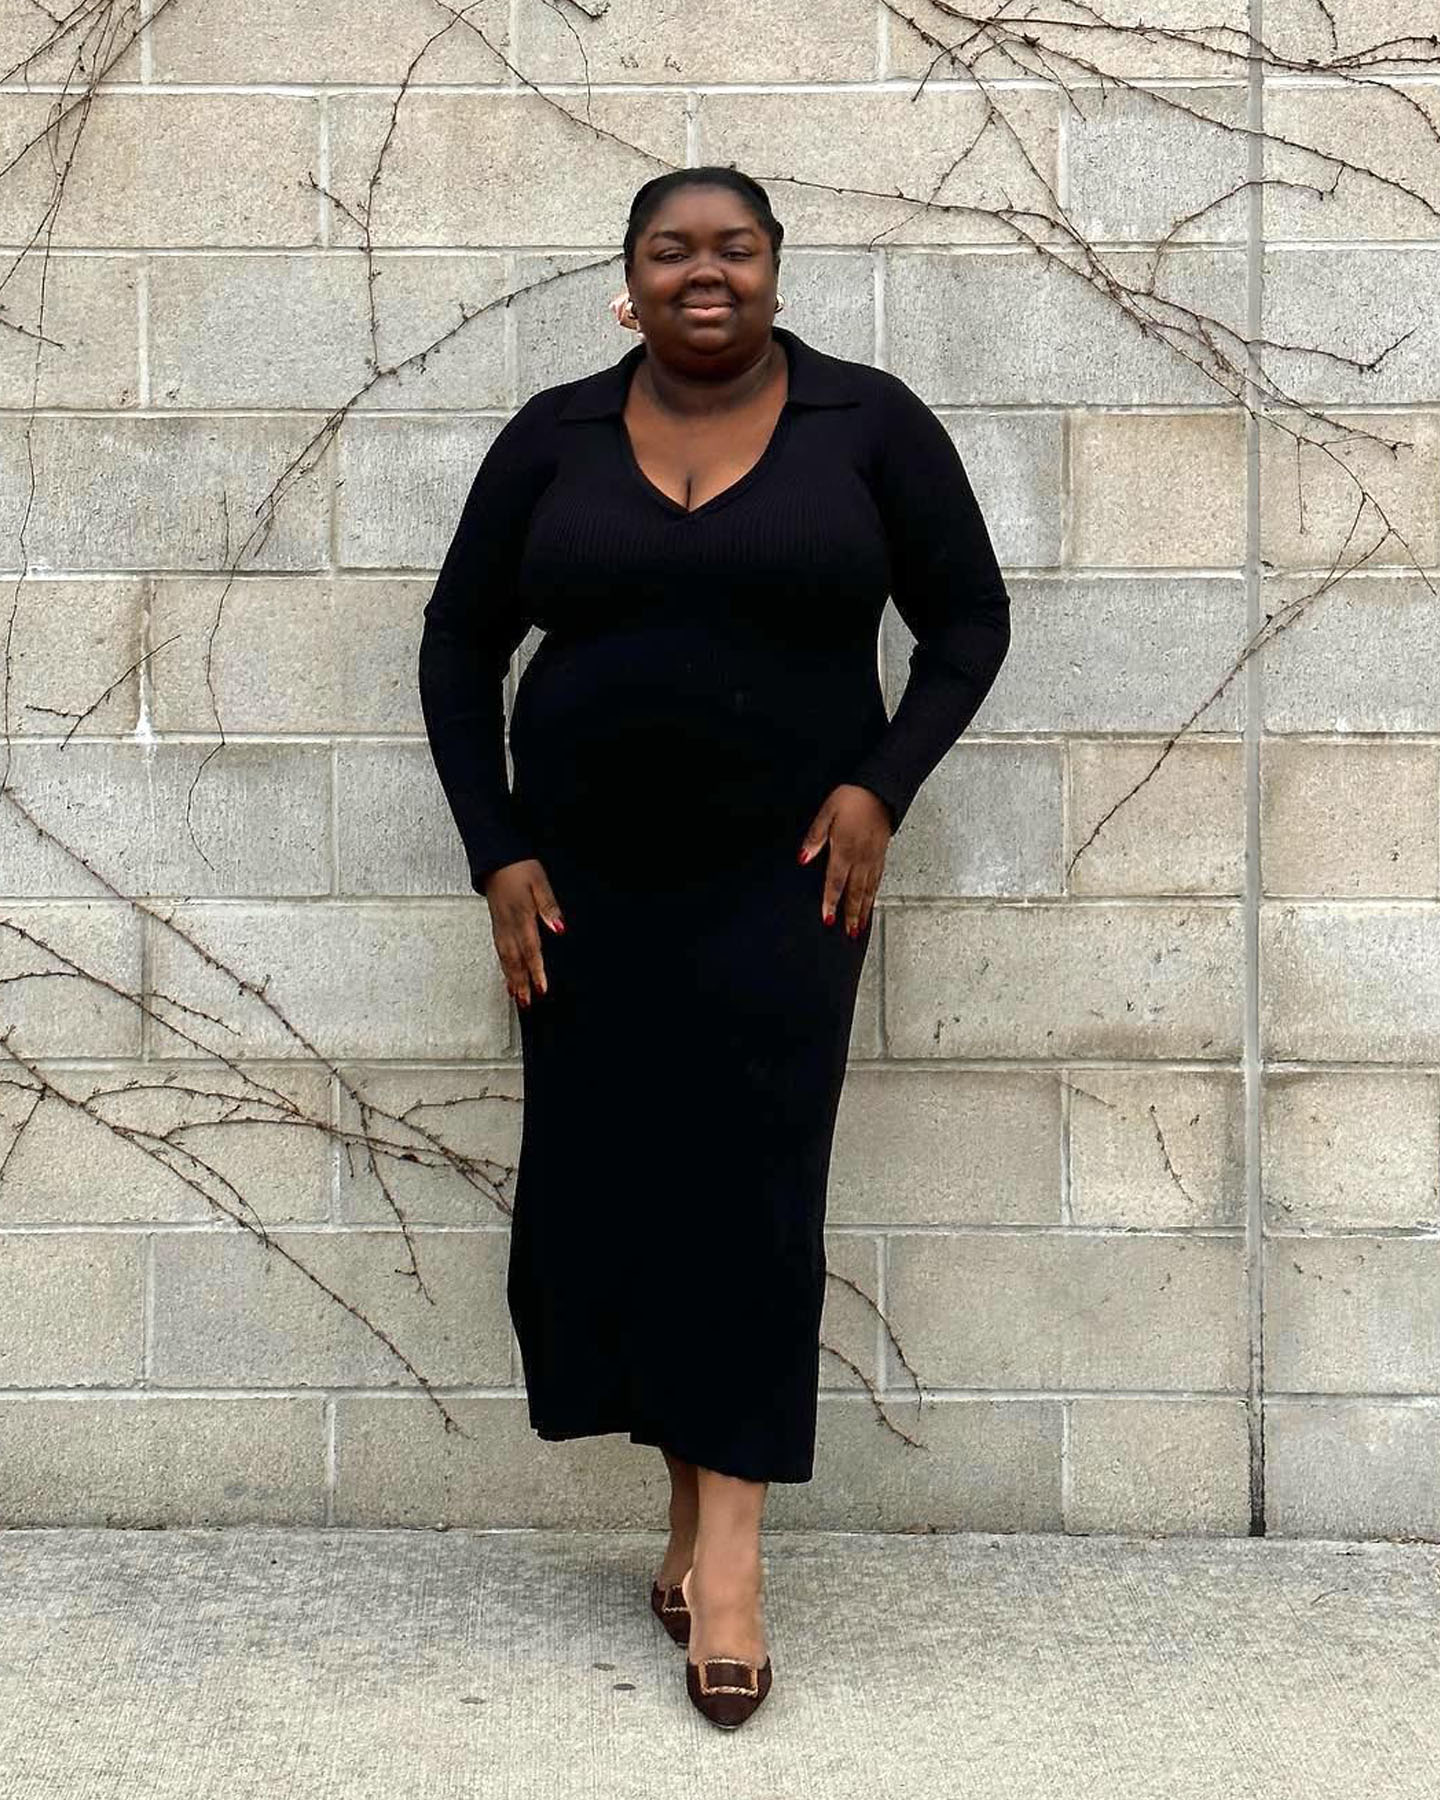 Plus size fashion influencer Abisola Omole smiles while posing in a long sleeve black dress and Manolo mule heels.